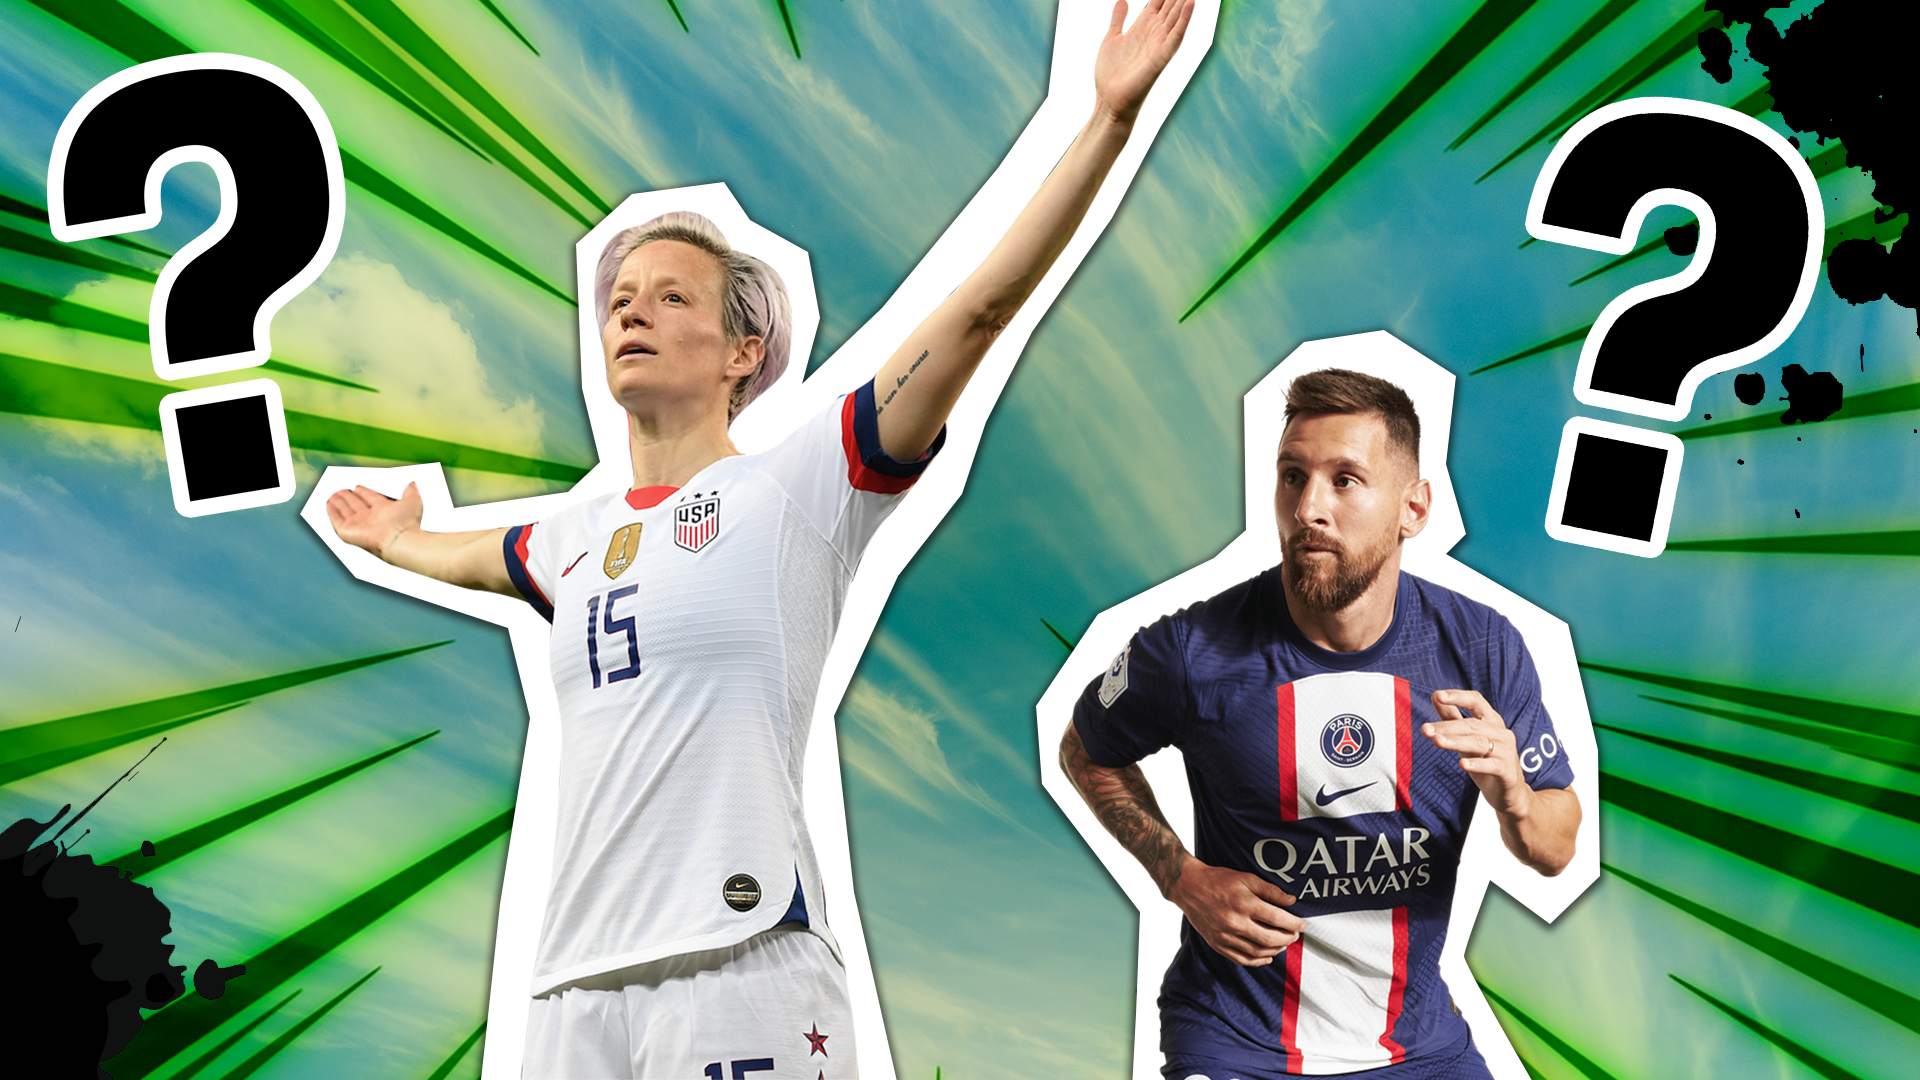 Play the World Cup Quiz and Win Bonus!